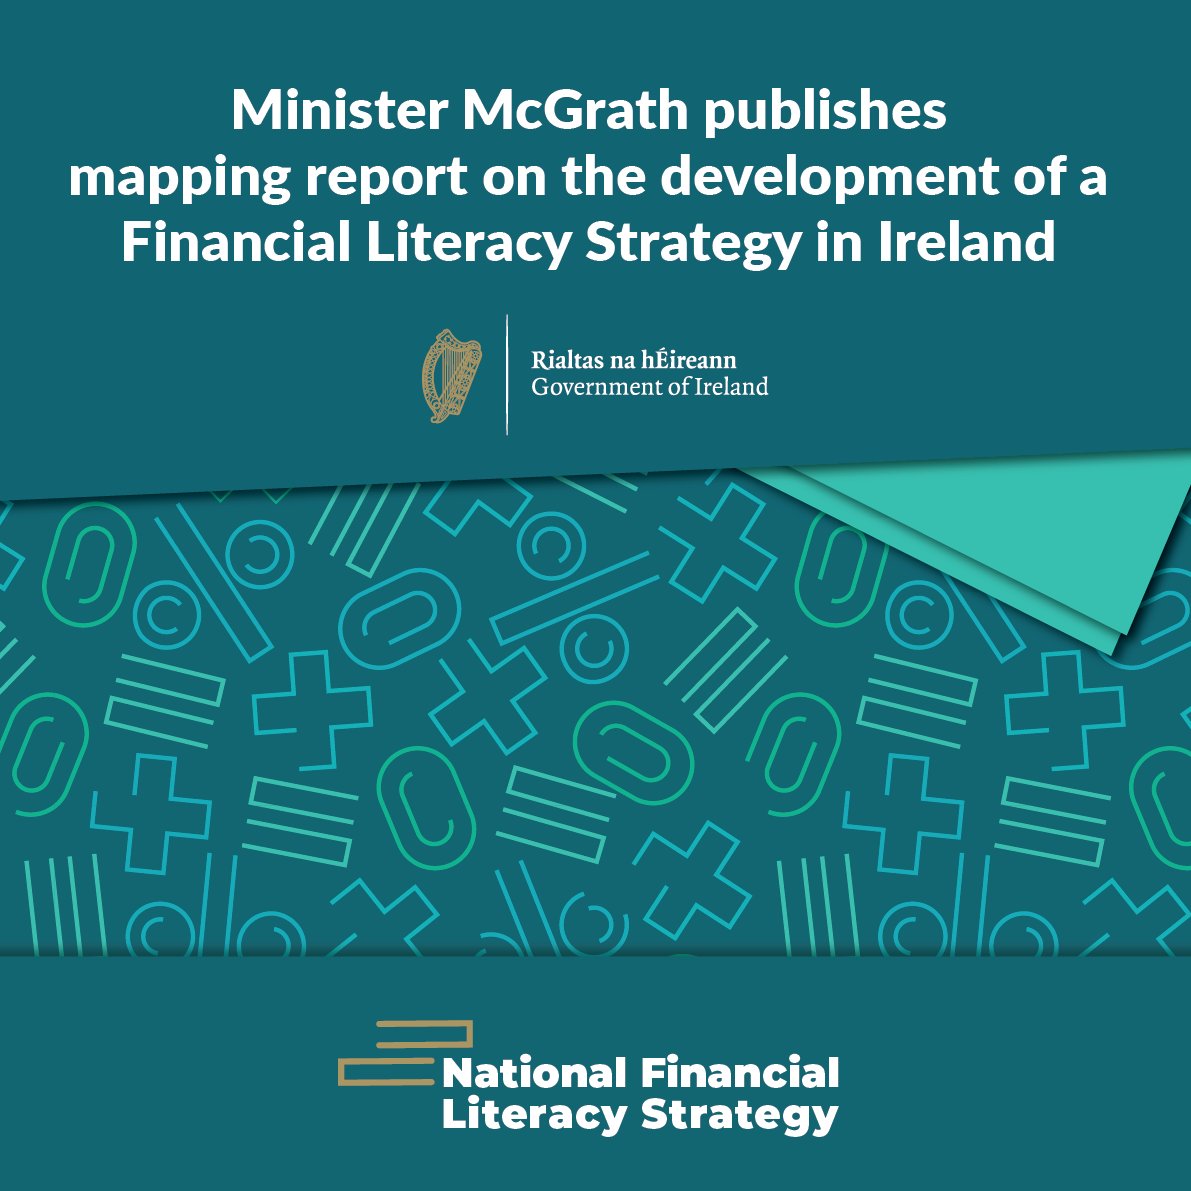 Minister @mmcgrathtd has today published a Mapping Report on the development of a National Financial Literacy Strategy in Ireland. Financial literacy and education is an important part of financial consumer protection. Read more: gov.ie/en/press-relea…